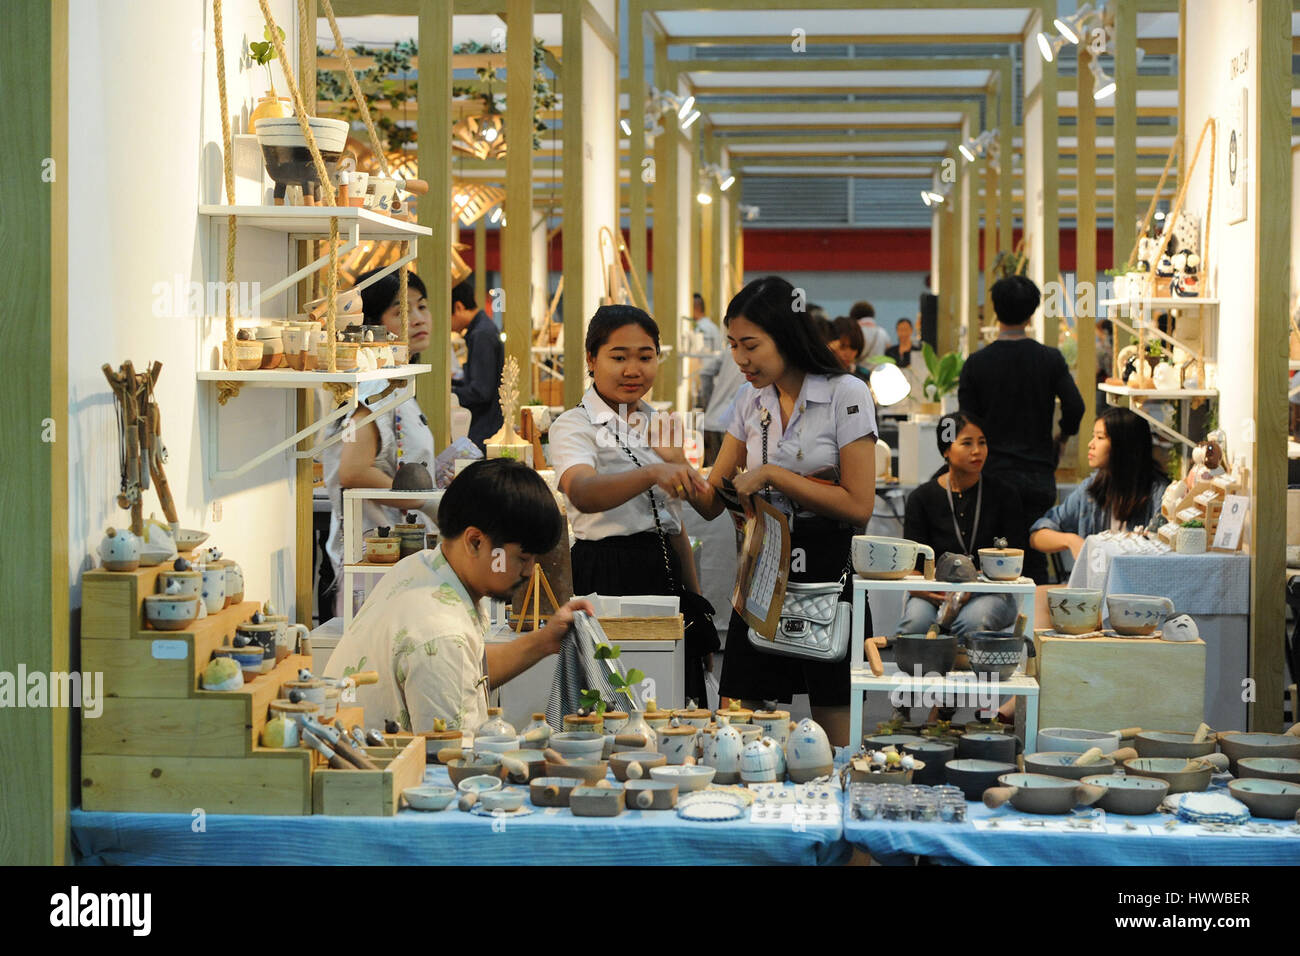 Bangkok, Thailand. 23rd Mar, 2017. Two students look at hand-made pottery during the International Innovative Craft Fair 2017 at the Bangkok International Trade & Exhibition Centre in Bangkok, Thailand, March 23, 2017. A total of 350 arts and crafts exhibitors worldwide presented their skills and products as the International Innovative Craft Fair (IICF) 2017 began on Thursday in Bangkok. The four-day event aims to facilitate experience sharing among international craftspeople and promote related tradings. Credit: Rachen Sageamsak/Xinhua/Alamy Live News Stock Photo